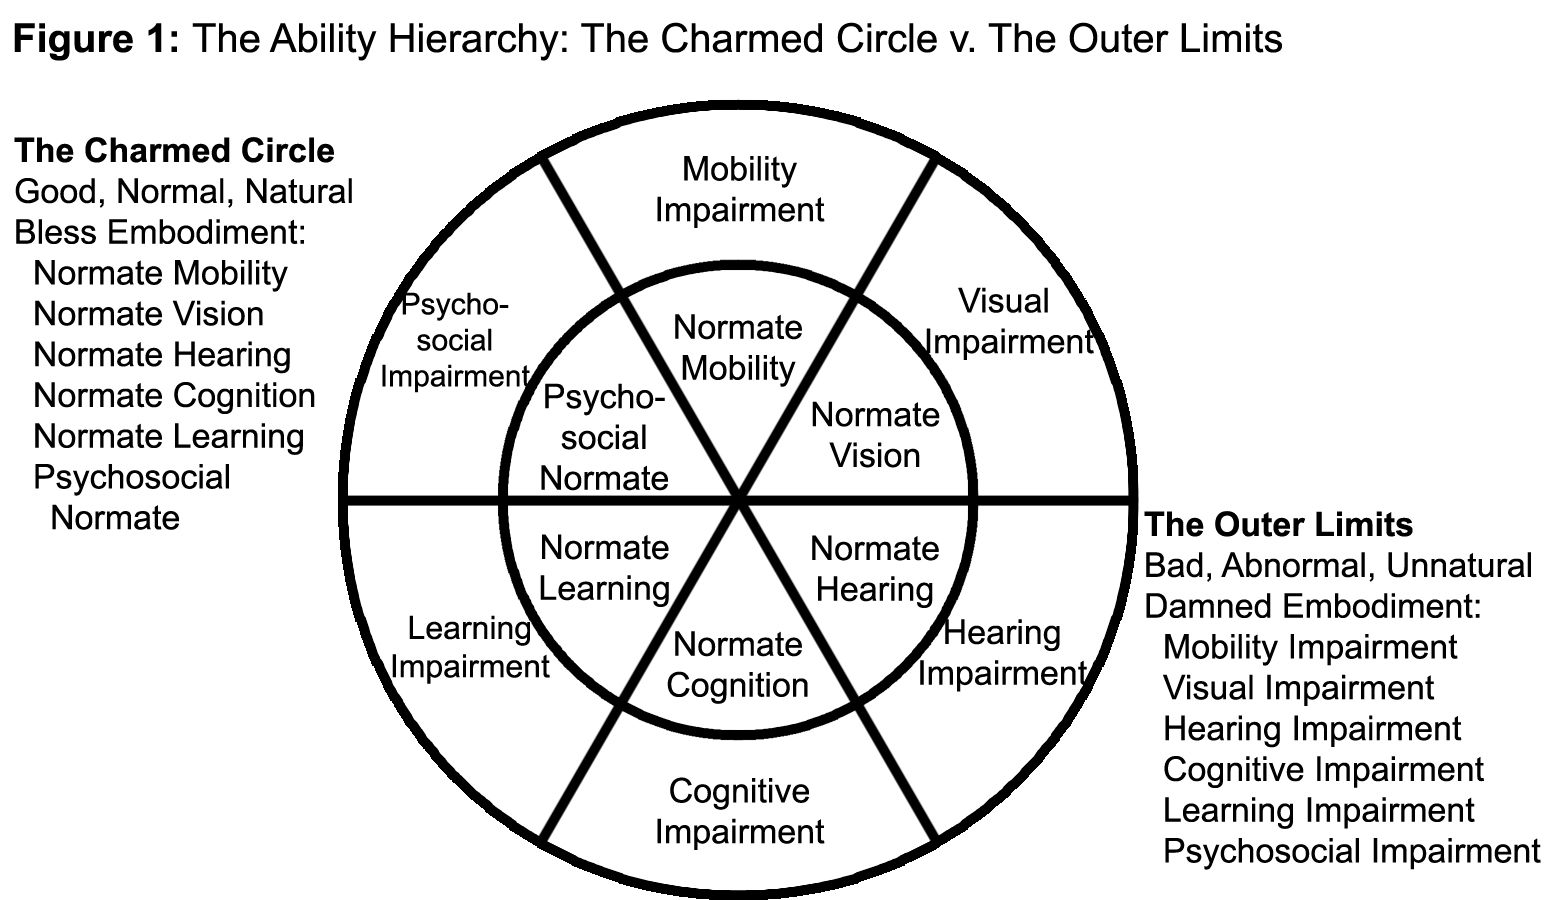 complex circular grid labeled The Ability Hierarchy: The Charmed Circle versus The Outer Limits.  The grid consists of two concentric circles, which are bisected by three lines, thus creating a matrix of 24 different spaces.  Those spaces are labeled with phrases like 'normate mobility' and 'mobility impairment', 'normate vision' and 'visual impairment'.  The four other dimensions are hearing, cognitive, learning, and psycho-social.  Additional lists outside of the graph indicate that 'The Charmed Circle' is described by words such as good, normal, and natural, and bless embodiment, while 'The Outer Limits' is referred to as 'bad, abnormal, unnatural' and 'damned embodiment'